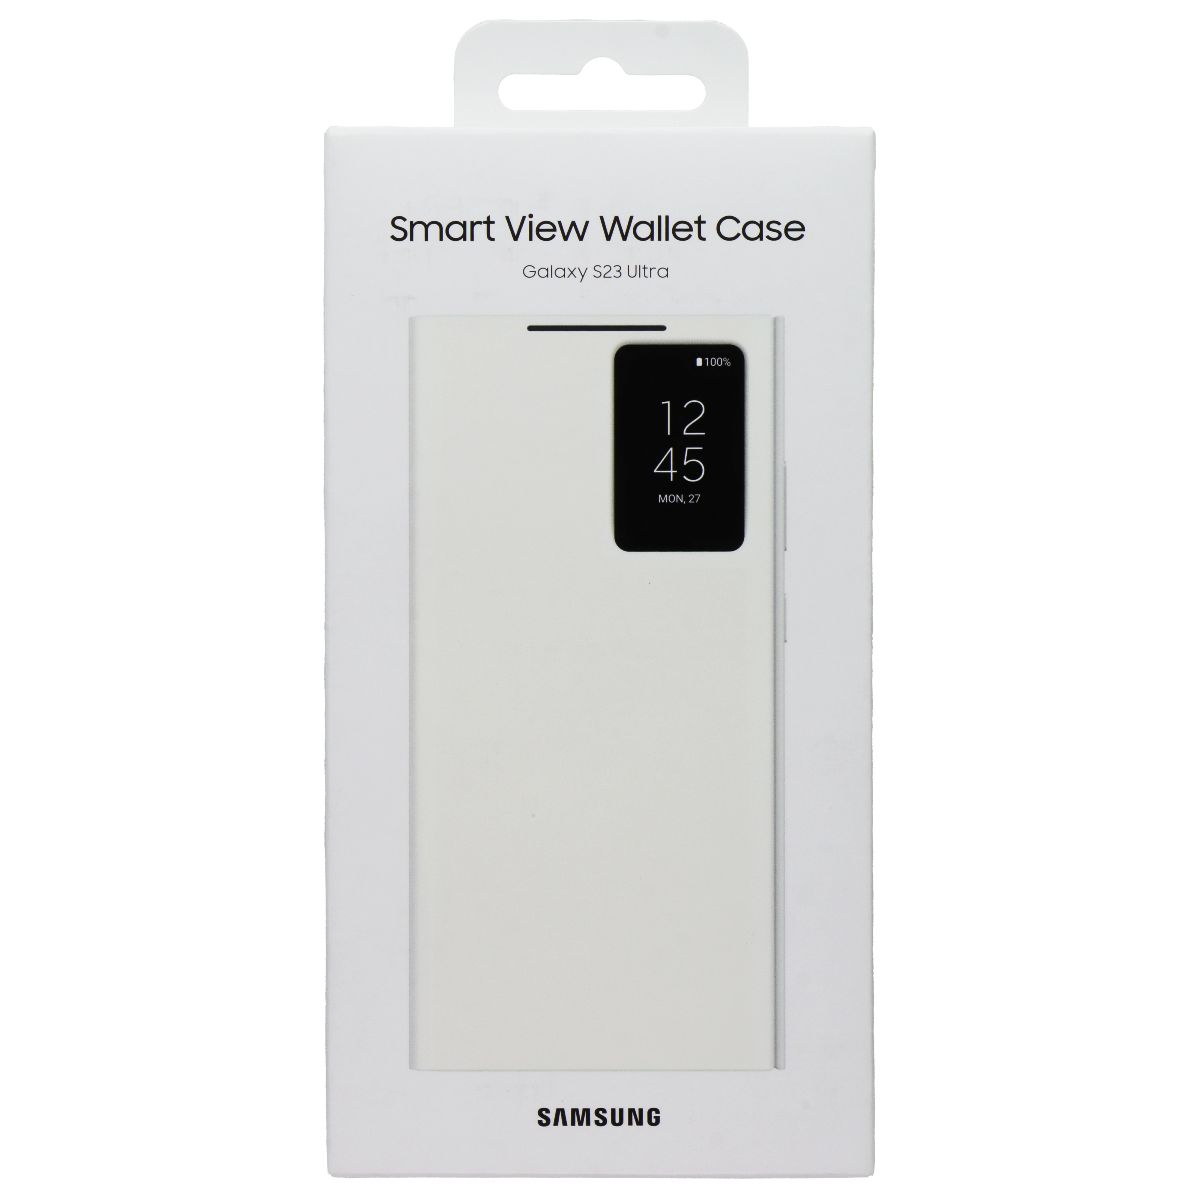 Samsung Smart View Wallet Case for Galaxy S23 Ultra - Cream